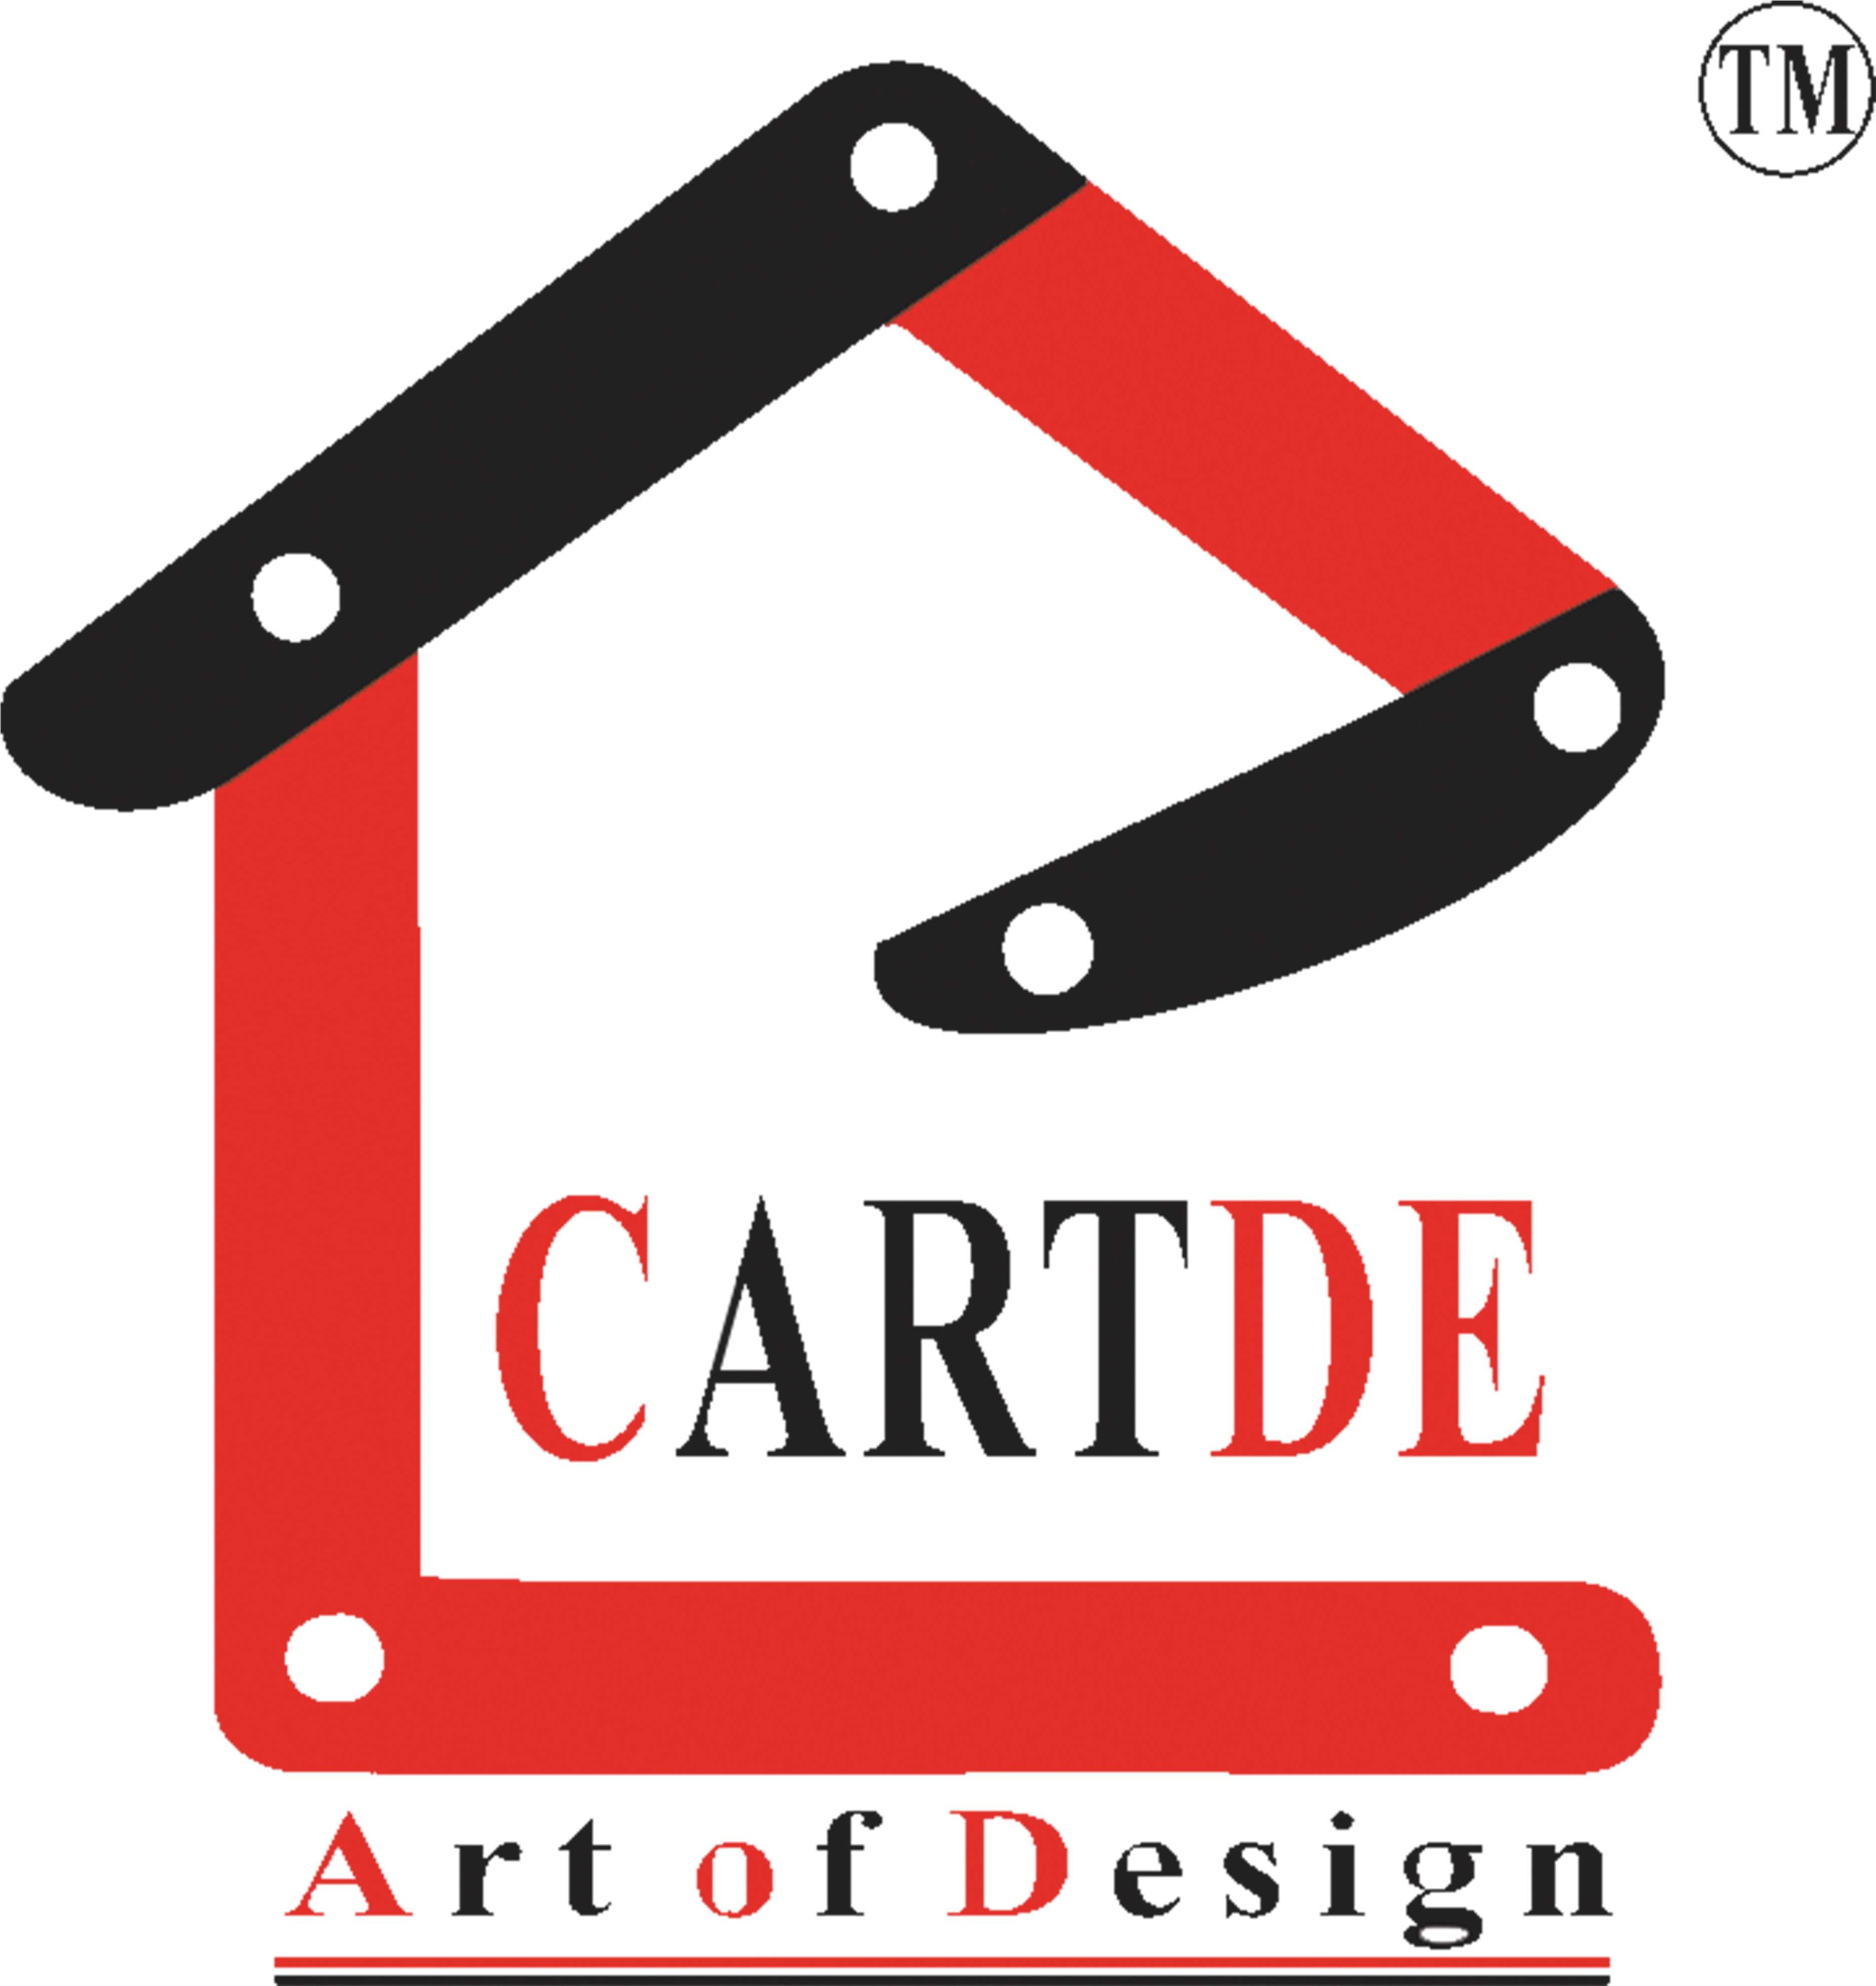 A Logo With A House And Text